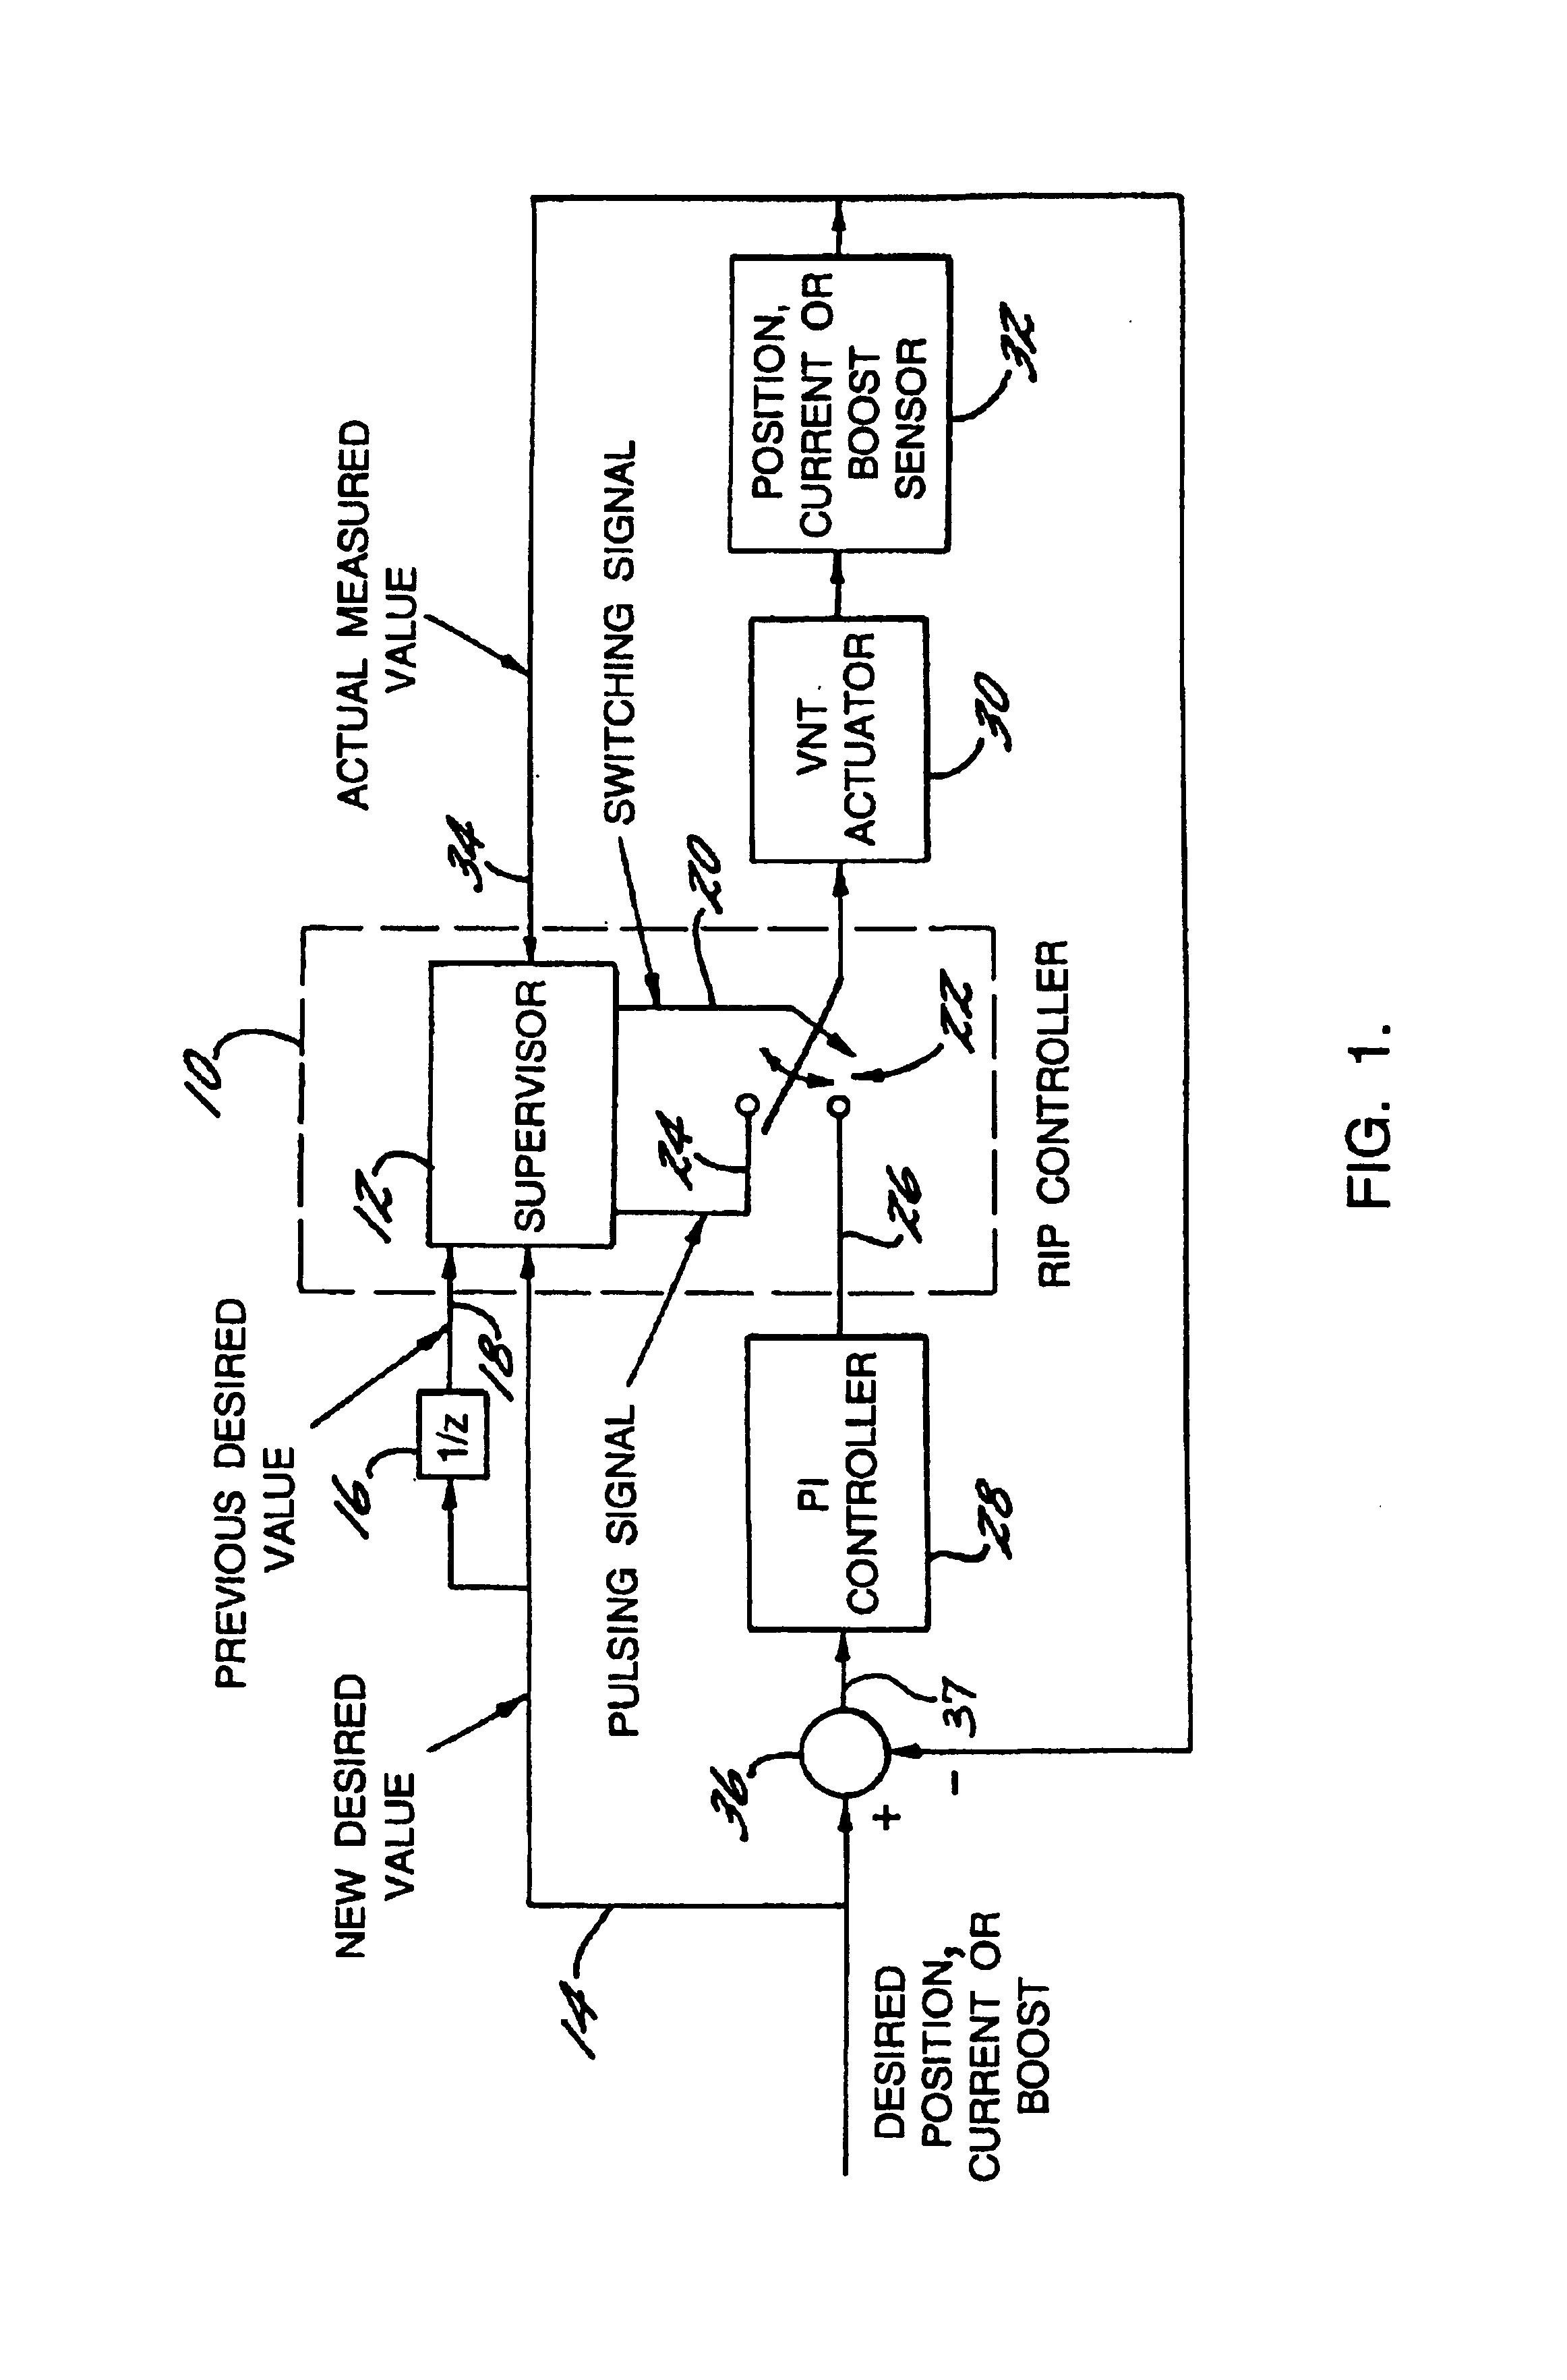 Control system for improved transient response in a variable-geometry turbocharger